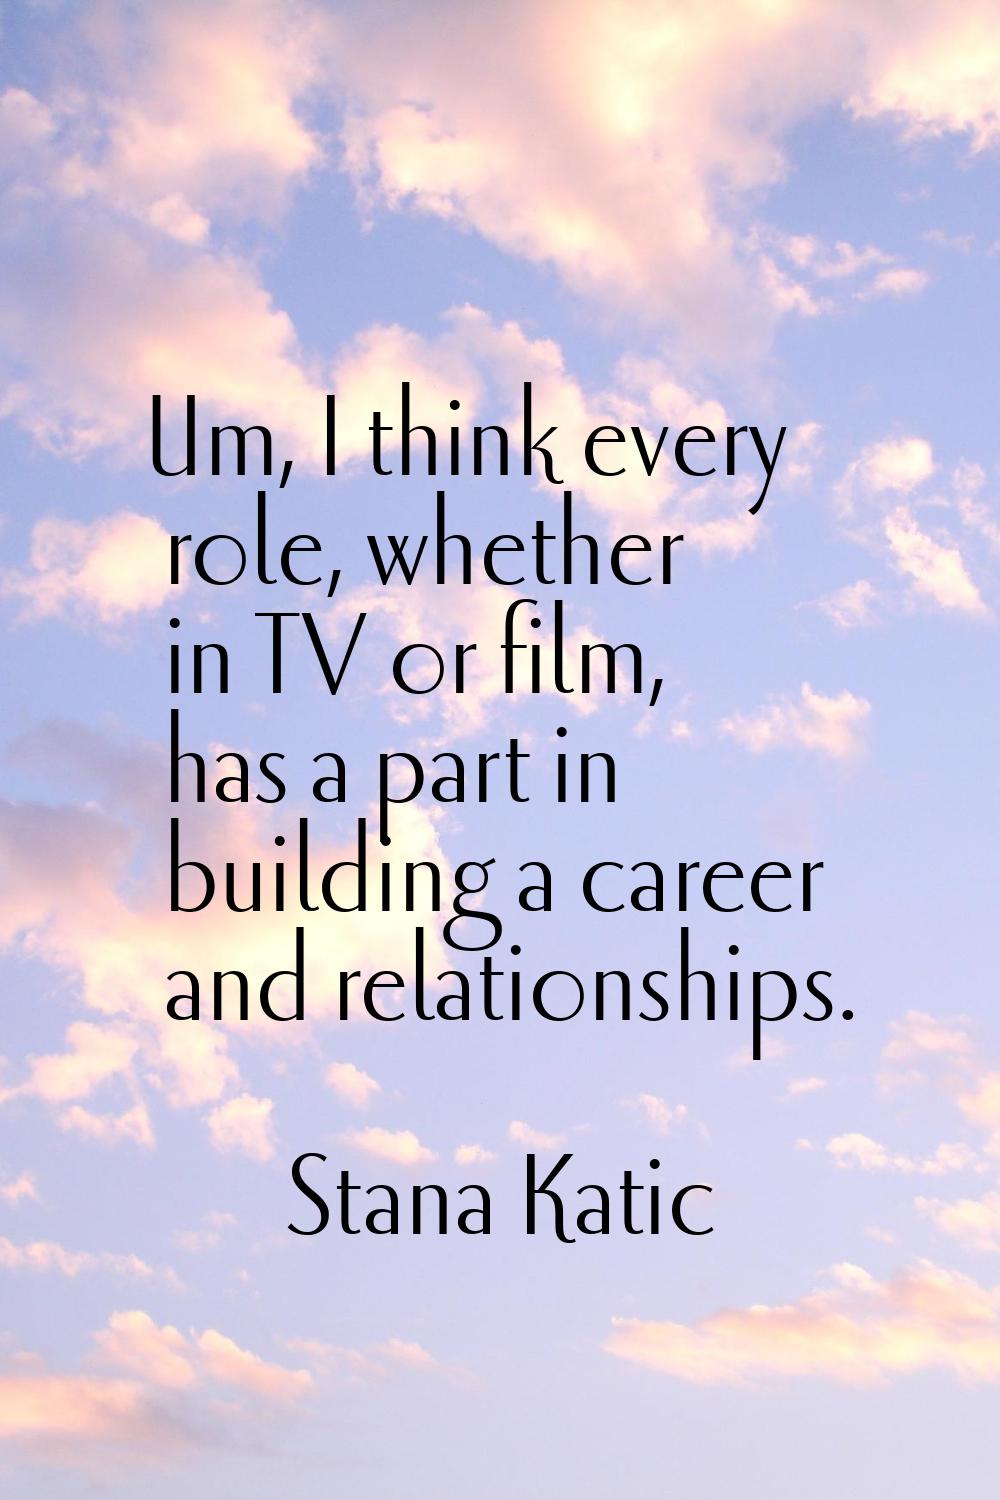 Um, I think every role, whether in TV or film, has a part in building a career and relationships.